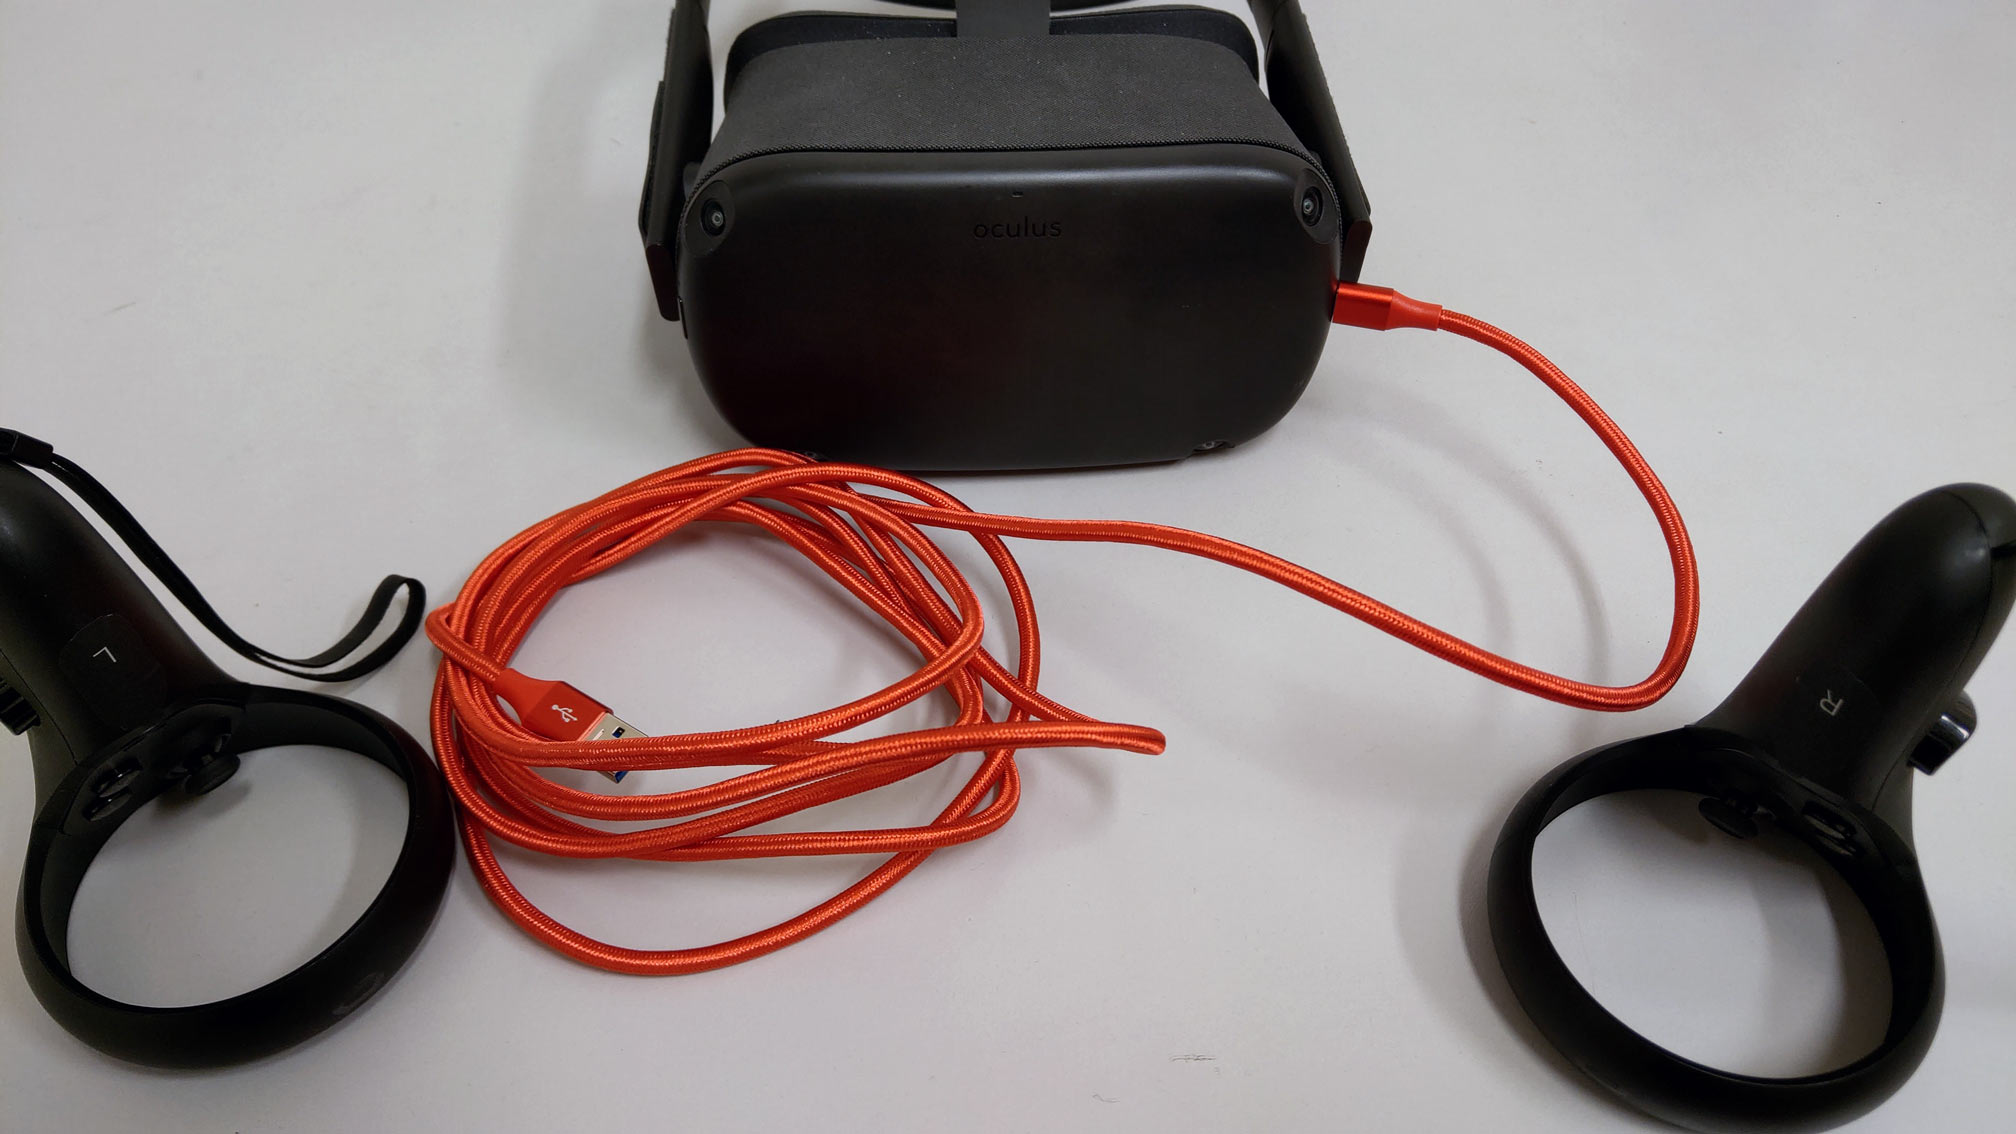 Oculus Quest Link Cable Review VS PartyLink Alternative - Which Is